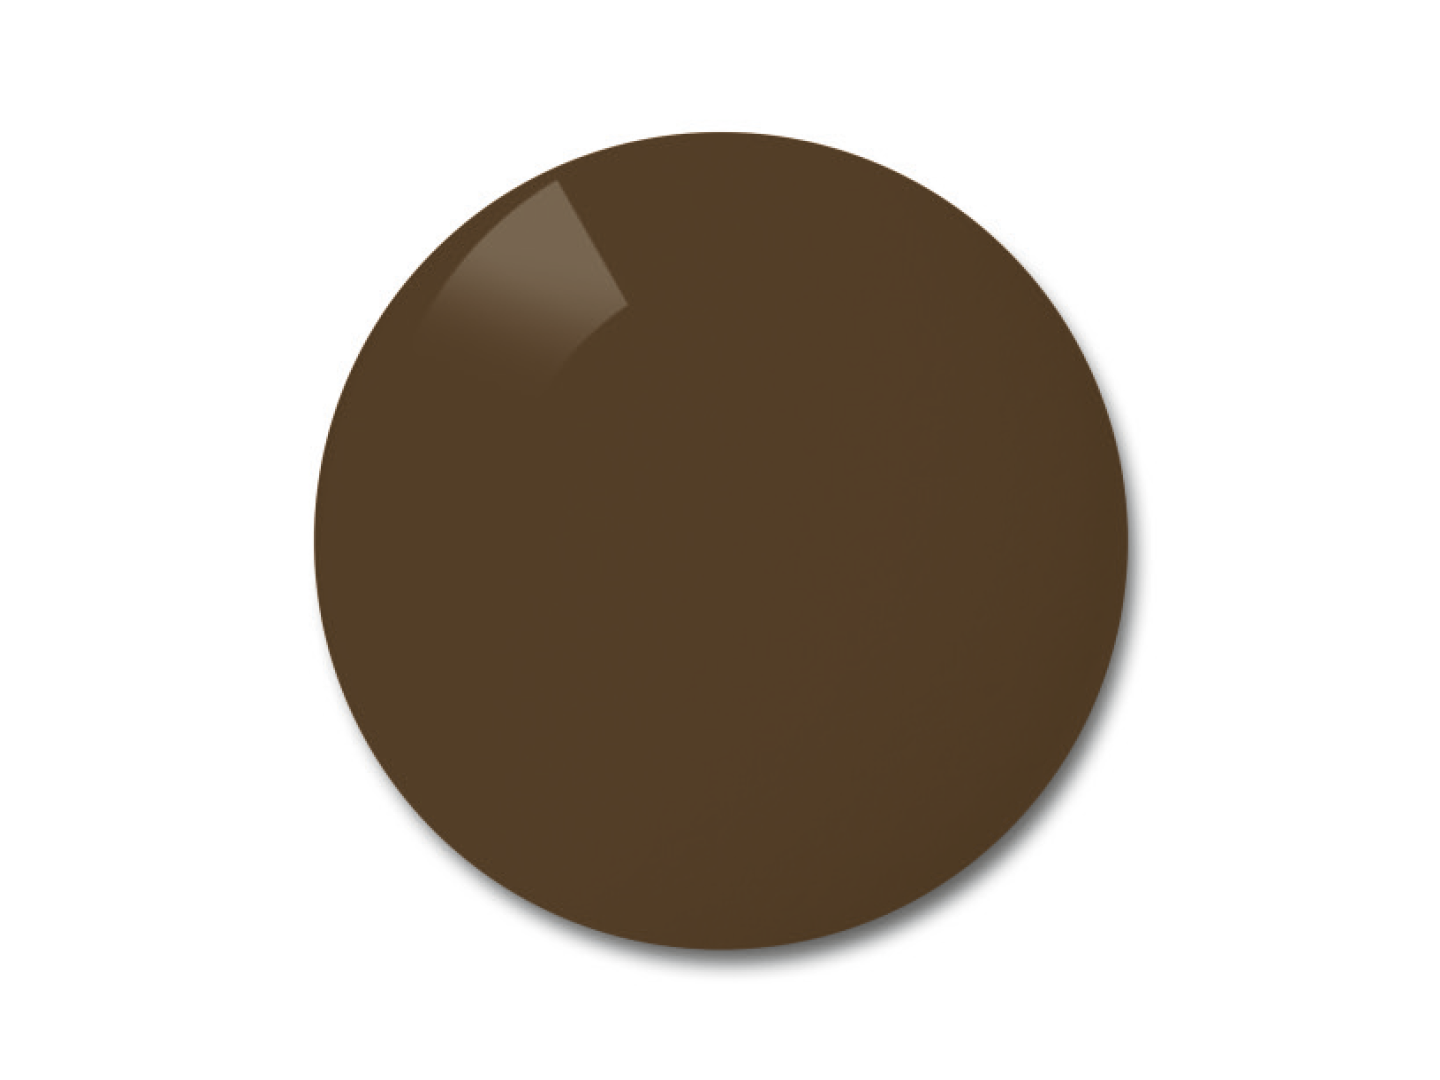 Illustration of ZEISS Polarized Lenses in the color option brown